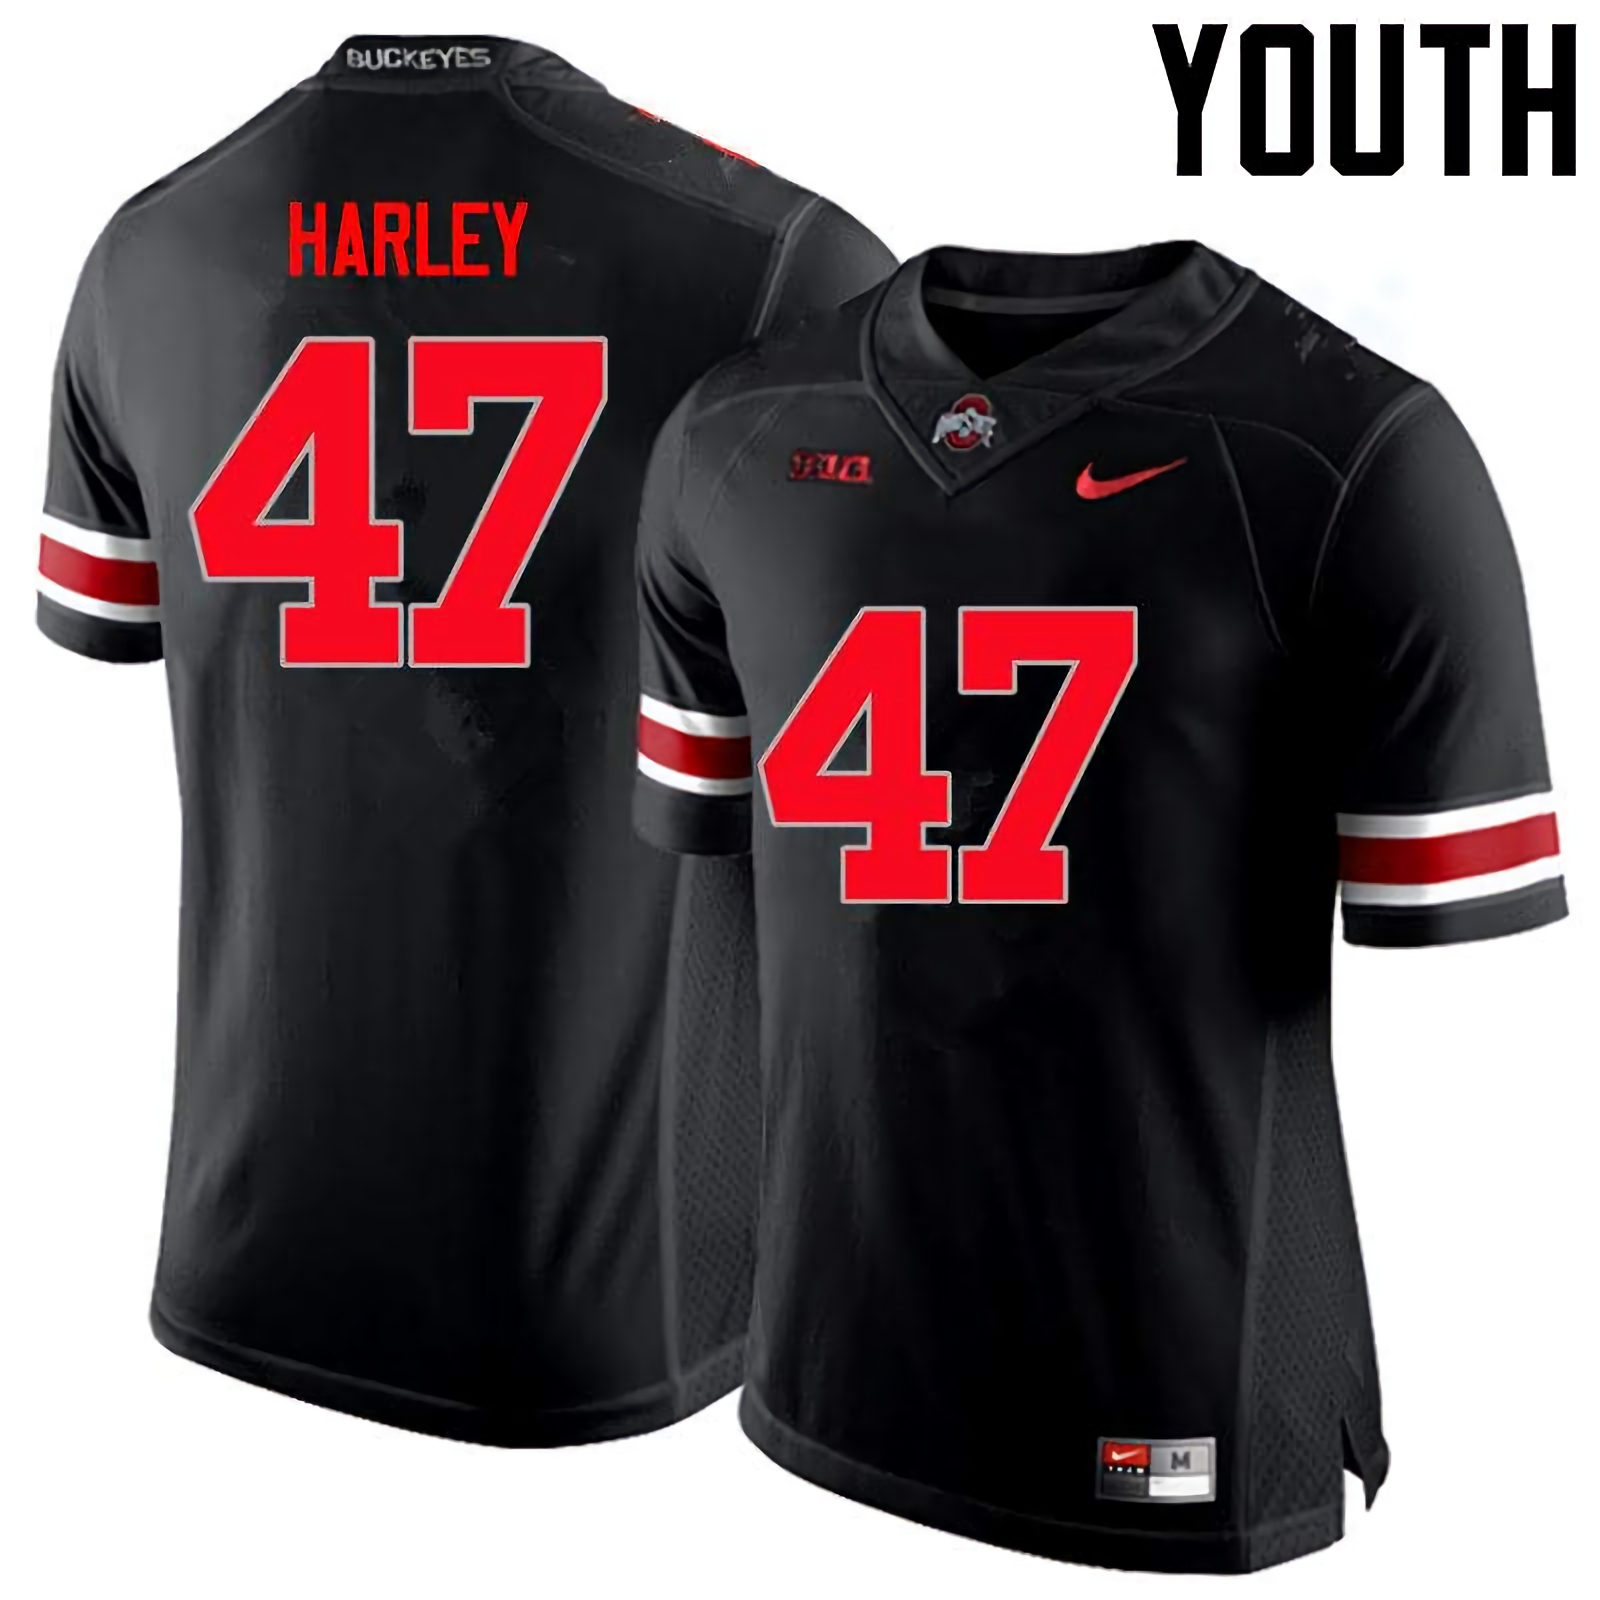 Chic Harley Ohio State Buckeyes Youth NCAA #47 Nike Black Limited College Stitched Football Jersey DZL6556GM